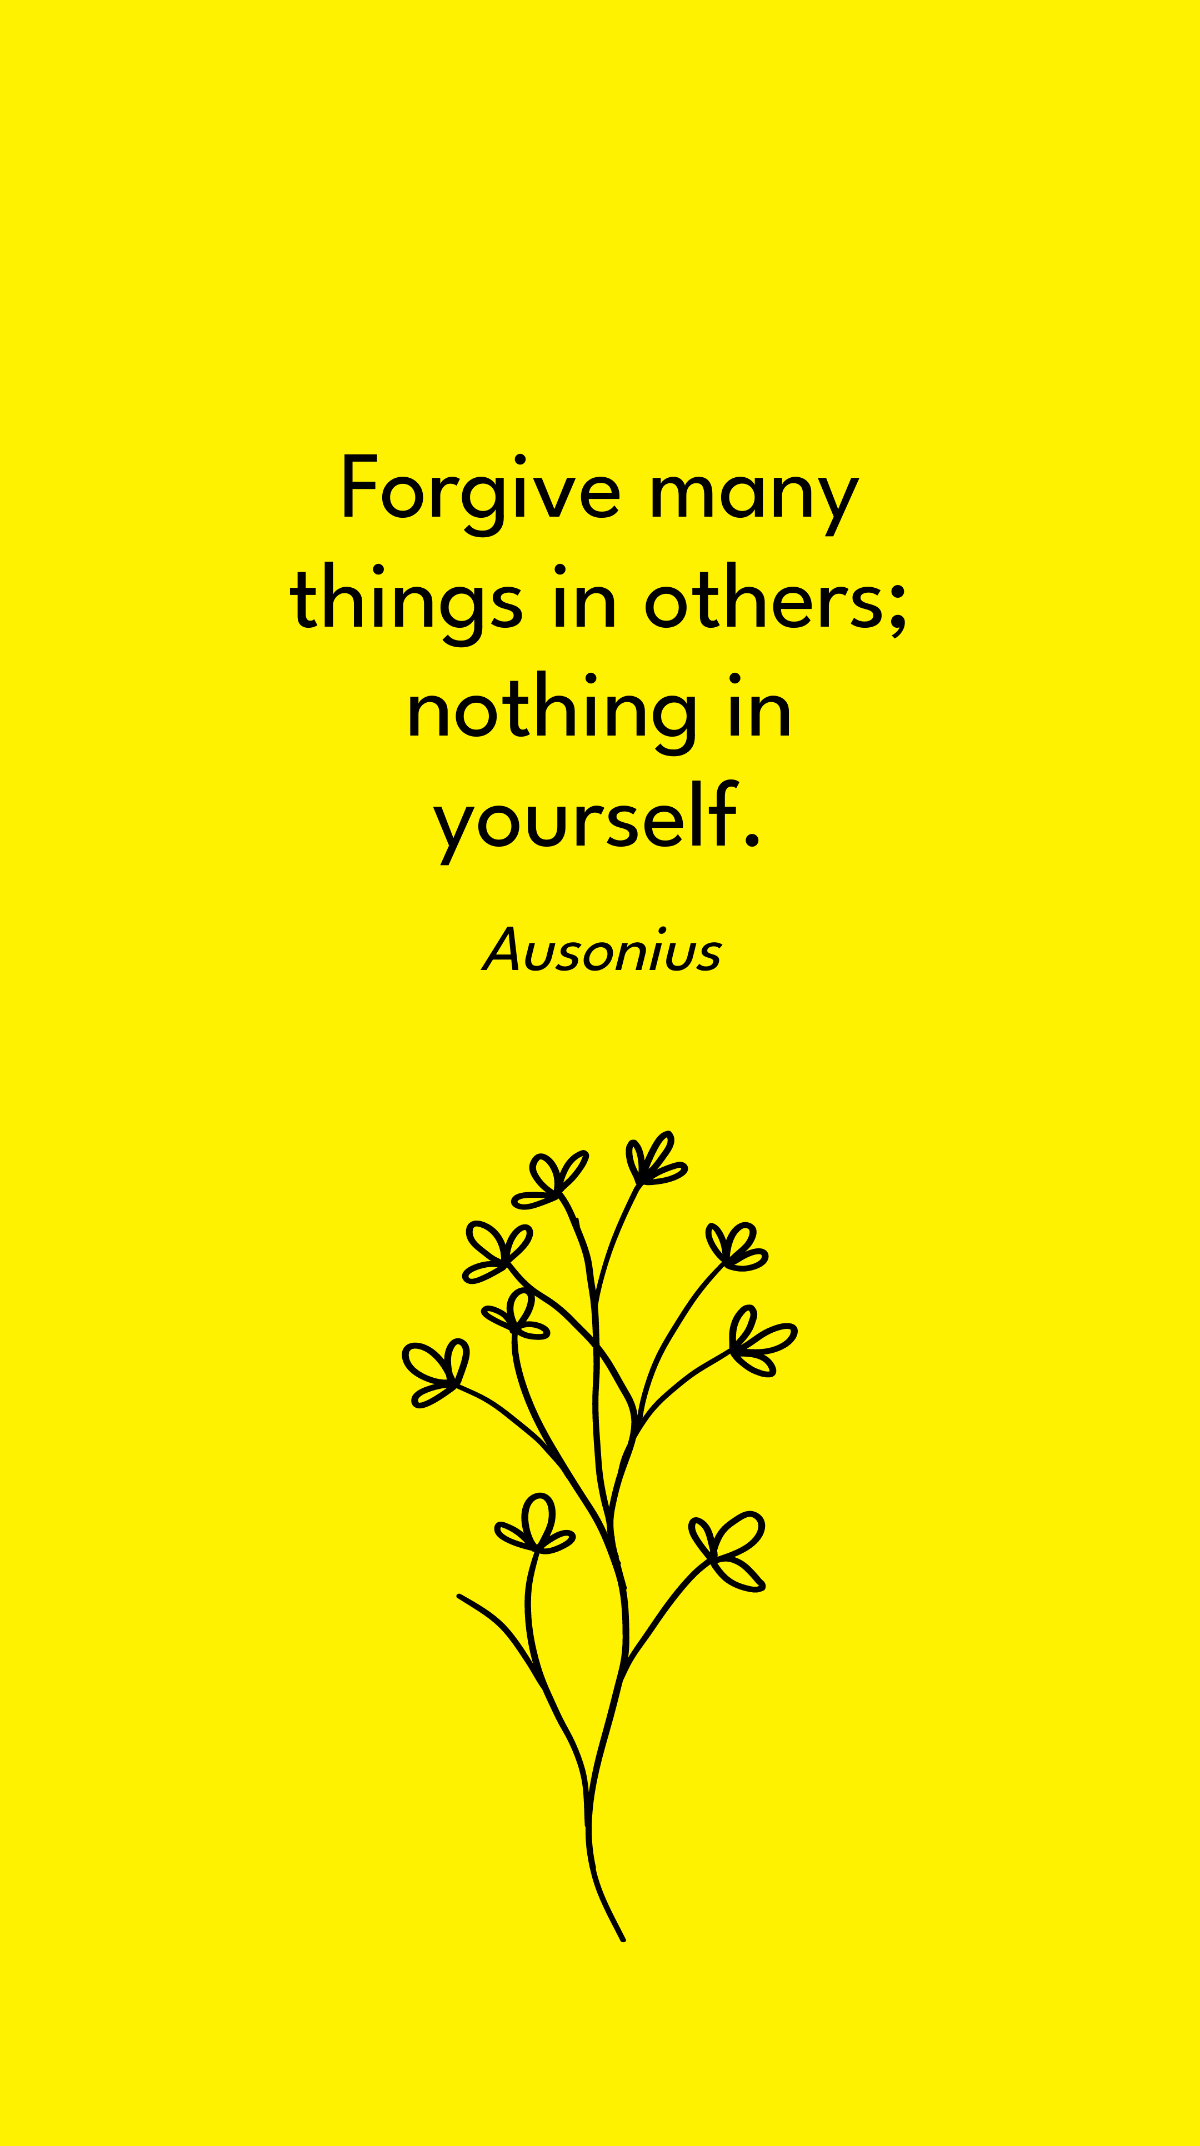 Ausonius - Forgive many things in others; nothing in yourself. Template